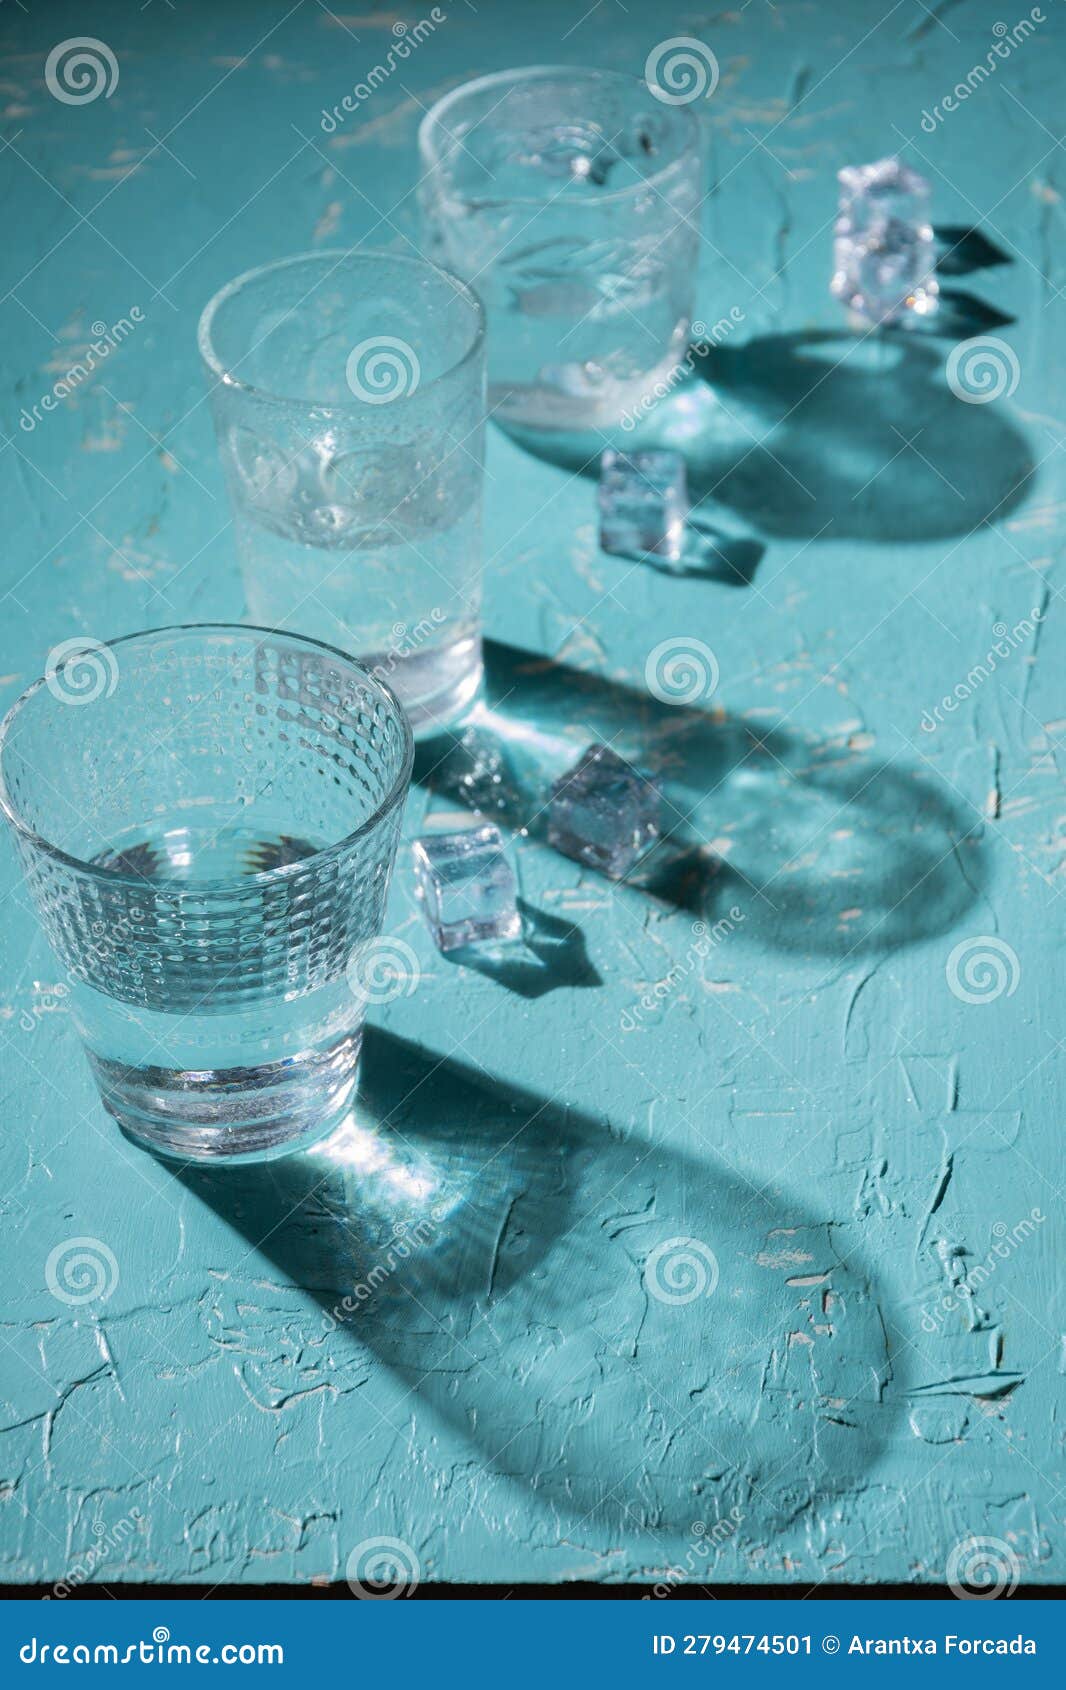 https://thumbs.dreamstime.com/z/view-three-glasses-water-blue-table-shadows-ice-cubes-vertical-copy-space-279474501.jpg